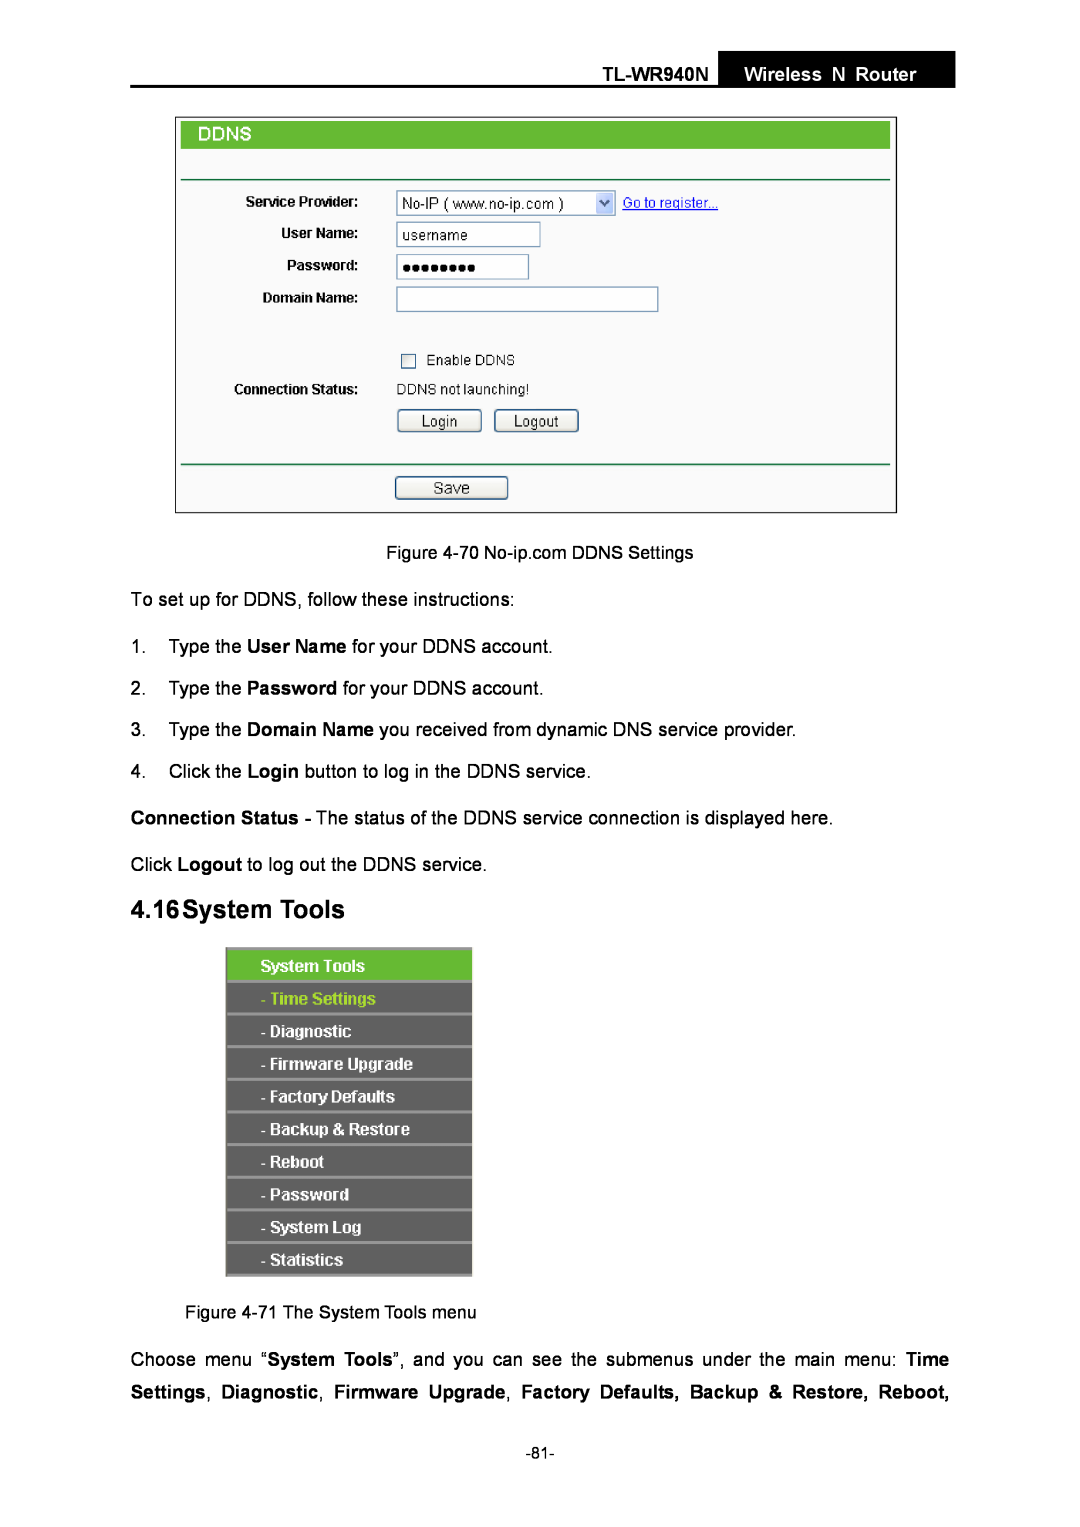 TP-Link manual 4.16System Tools, TL-WR940N Wireless N Router, 70 No-ip.com DDNS Settings, 71 The System Tools menu 